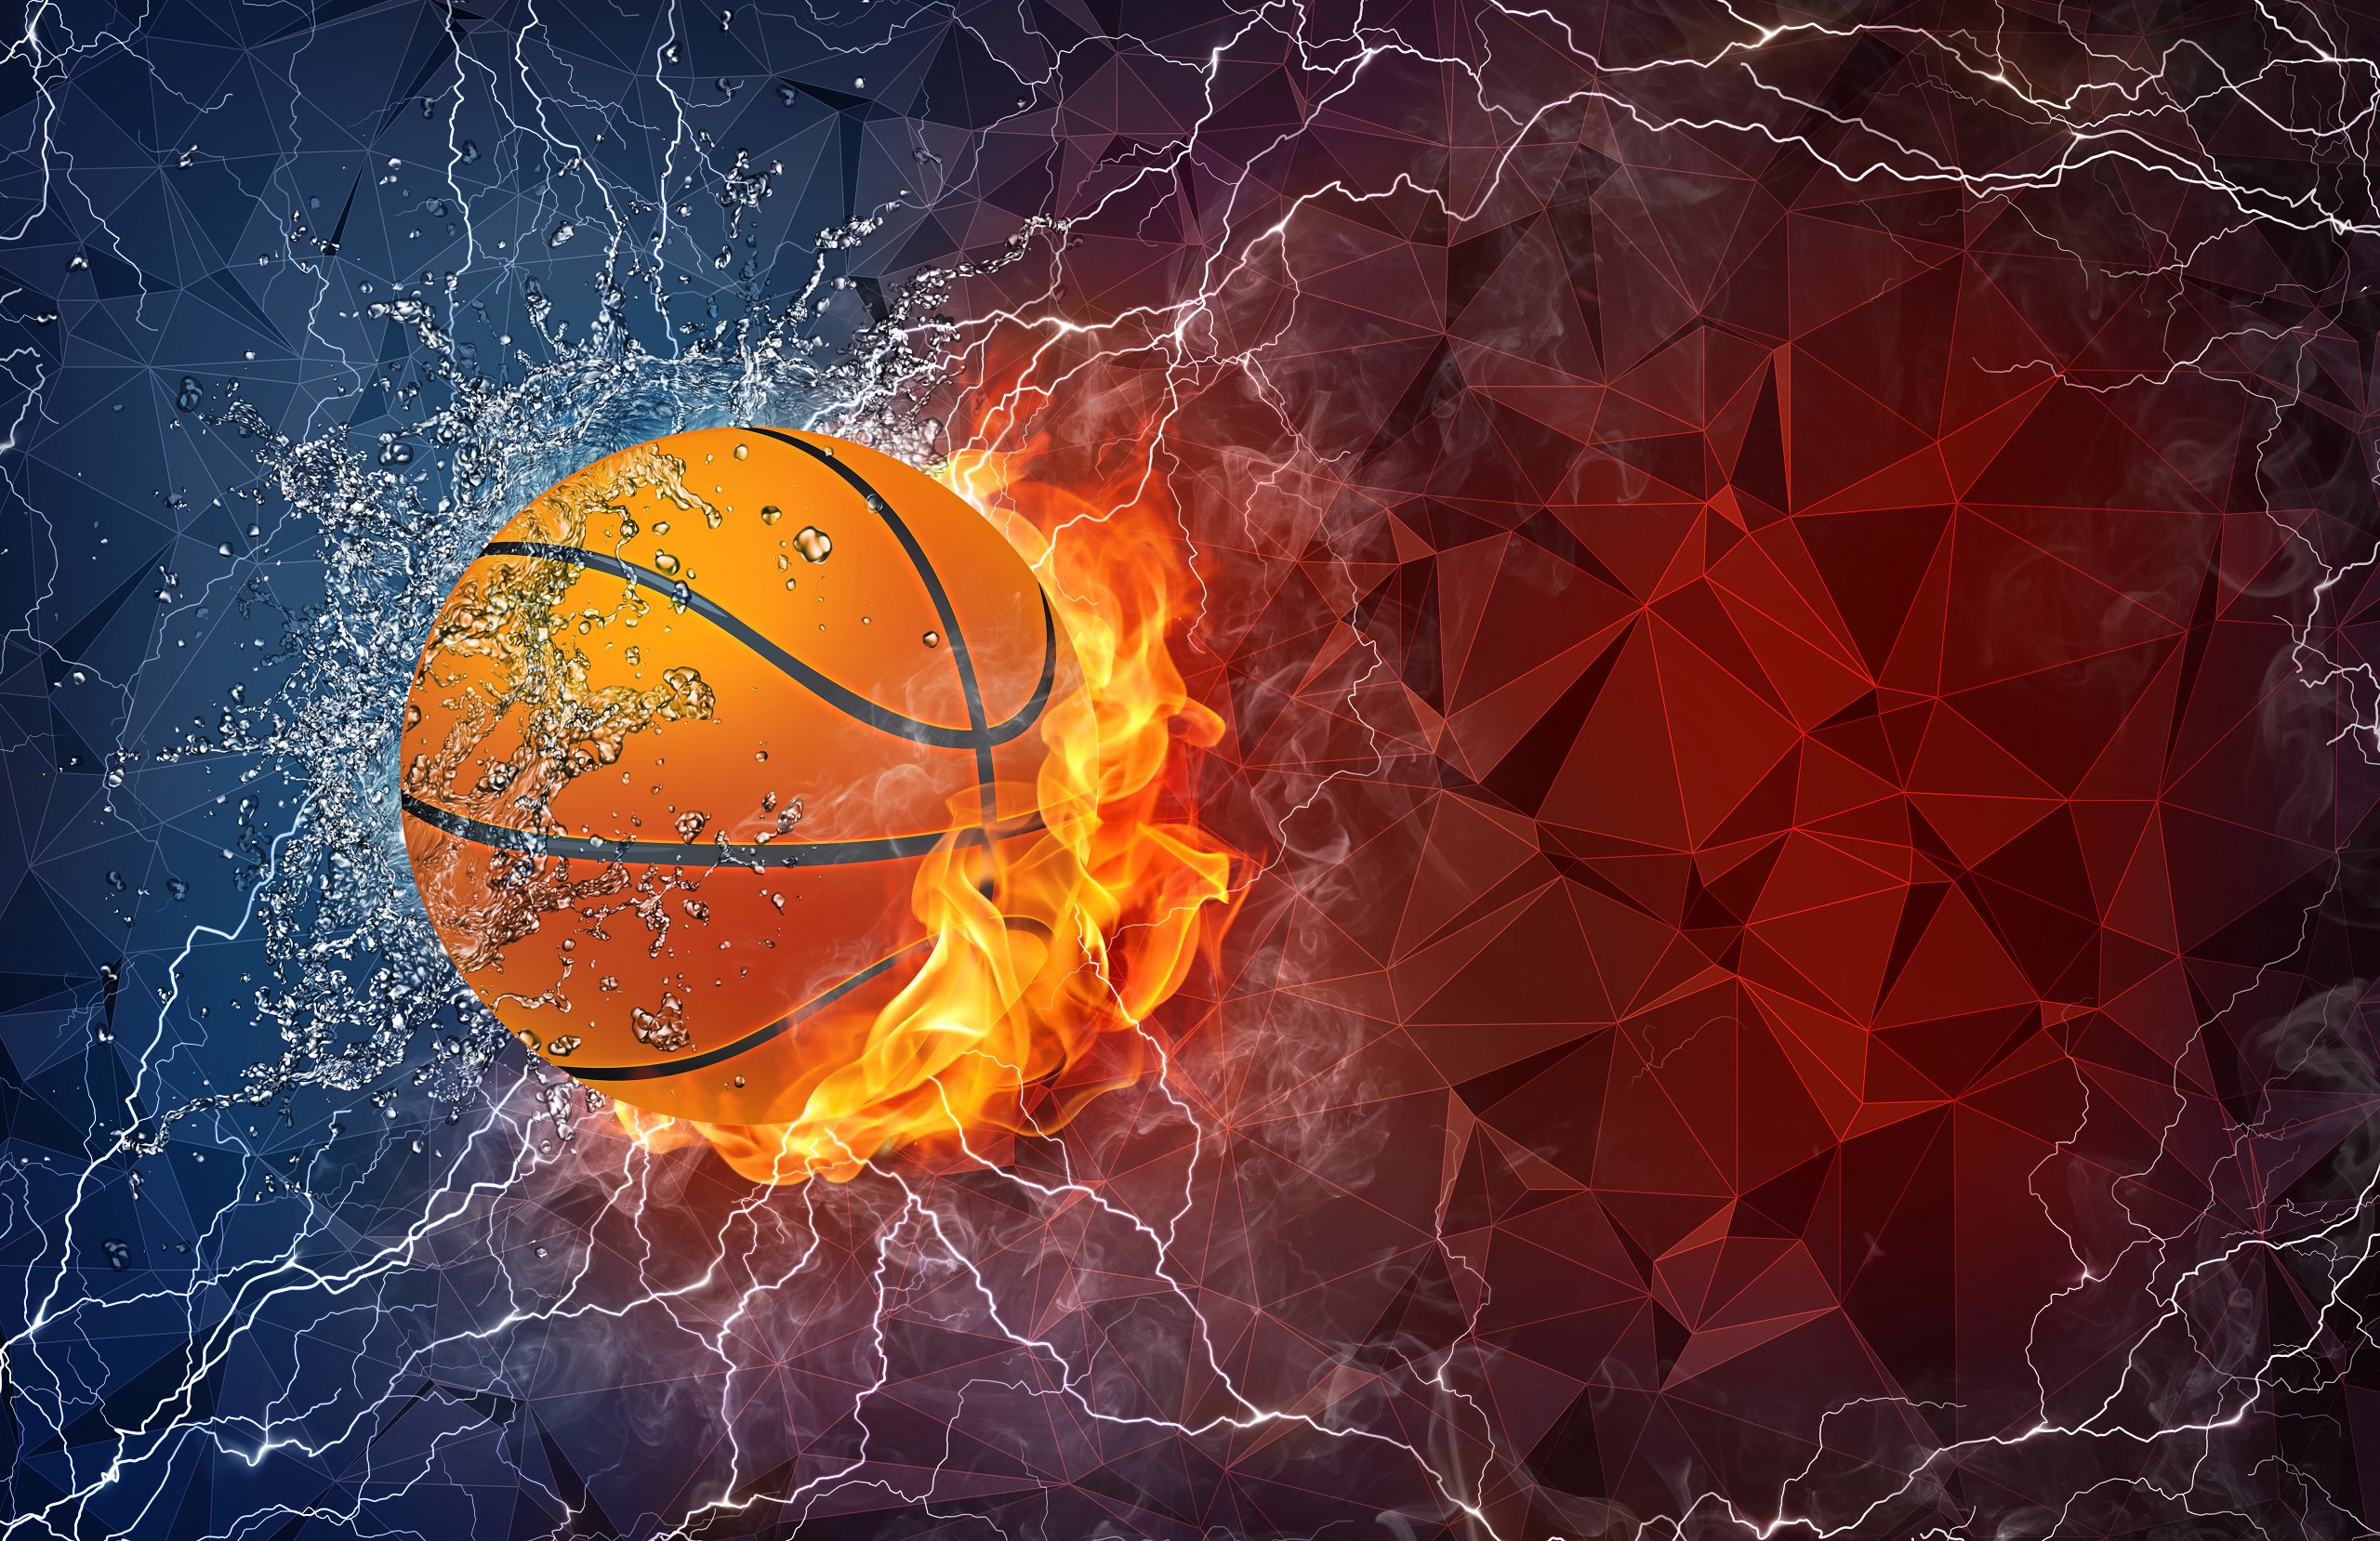 Cool Pictures Of Basketballs - HD Wallpaper 